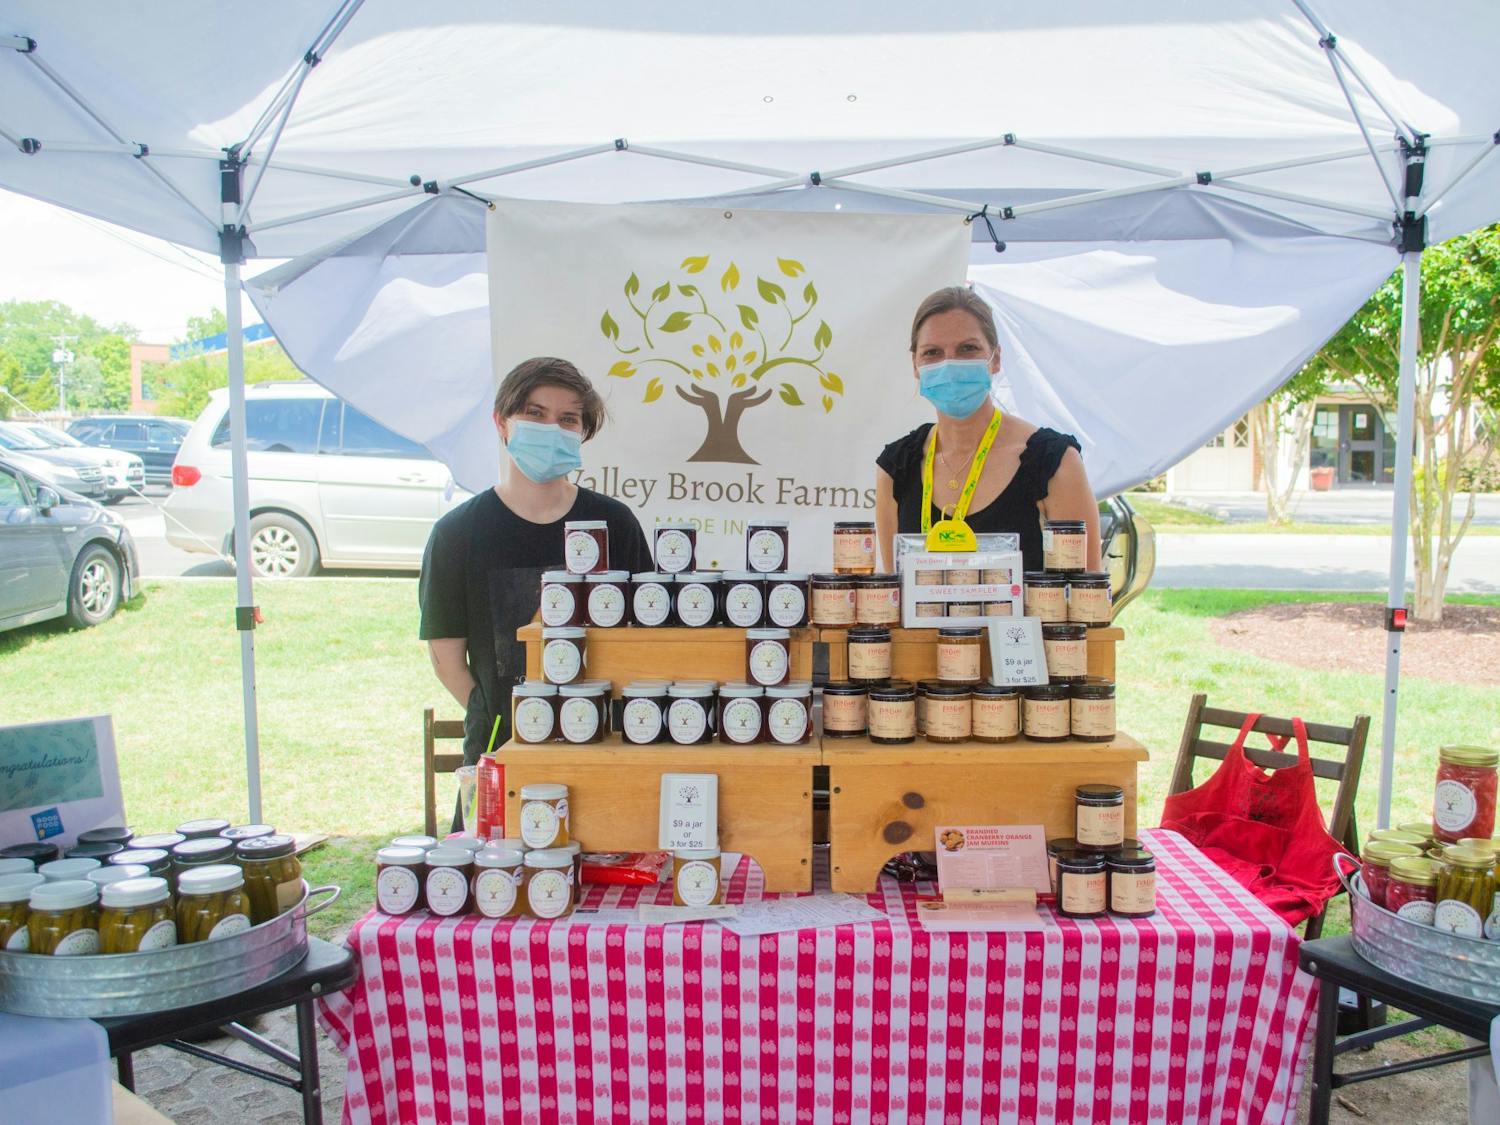 Andrea Davis, owner of Valley Brook Farms, stands with co-worker Matthew Pittman behind their booth at the Carrboro Farmers Market on Wednesday June 9, 2021. Valley Brook Farms is a local farm that makes a variety of jams, jellies, and pickled goods.